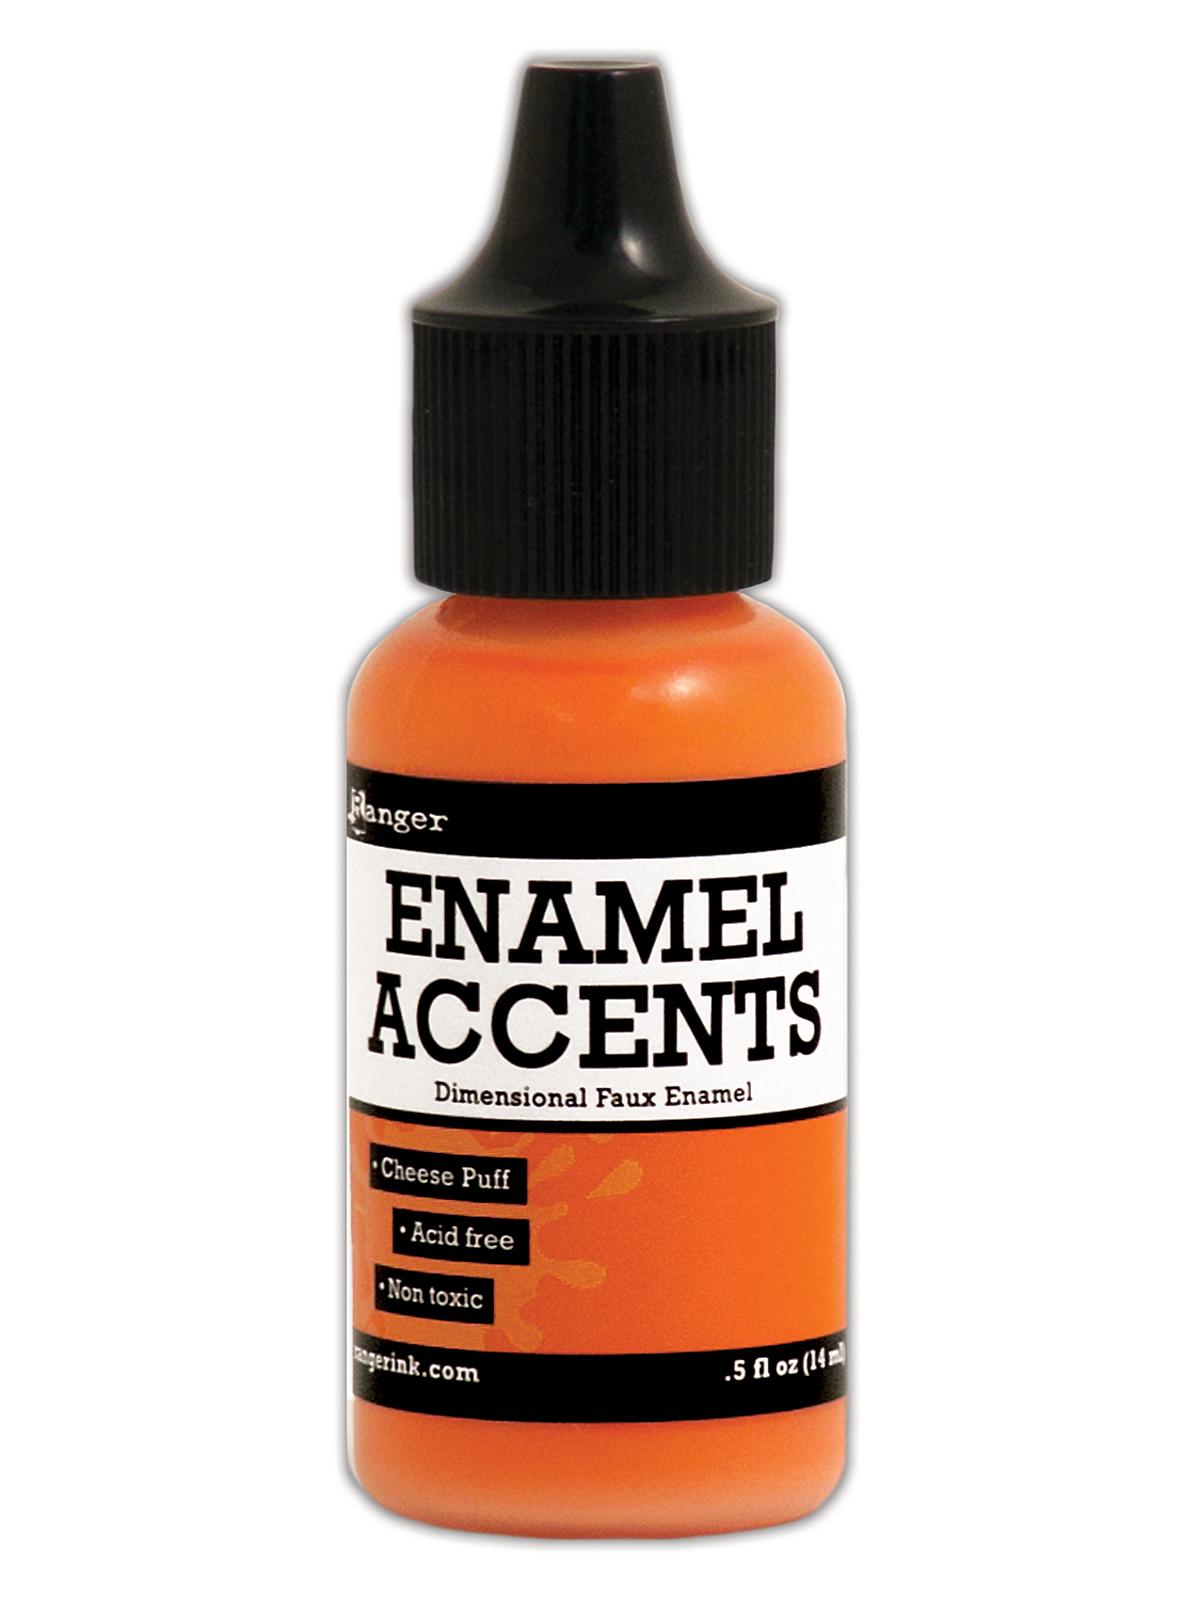 Enamel Accents Cheese Puff 1 2 Oz. Bottle